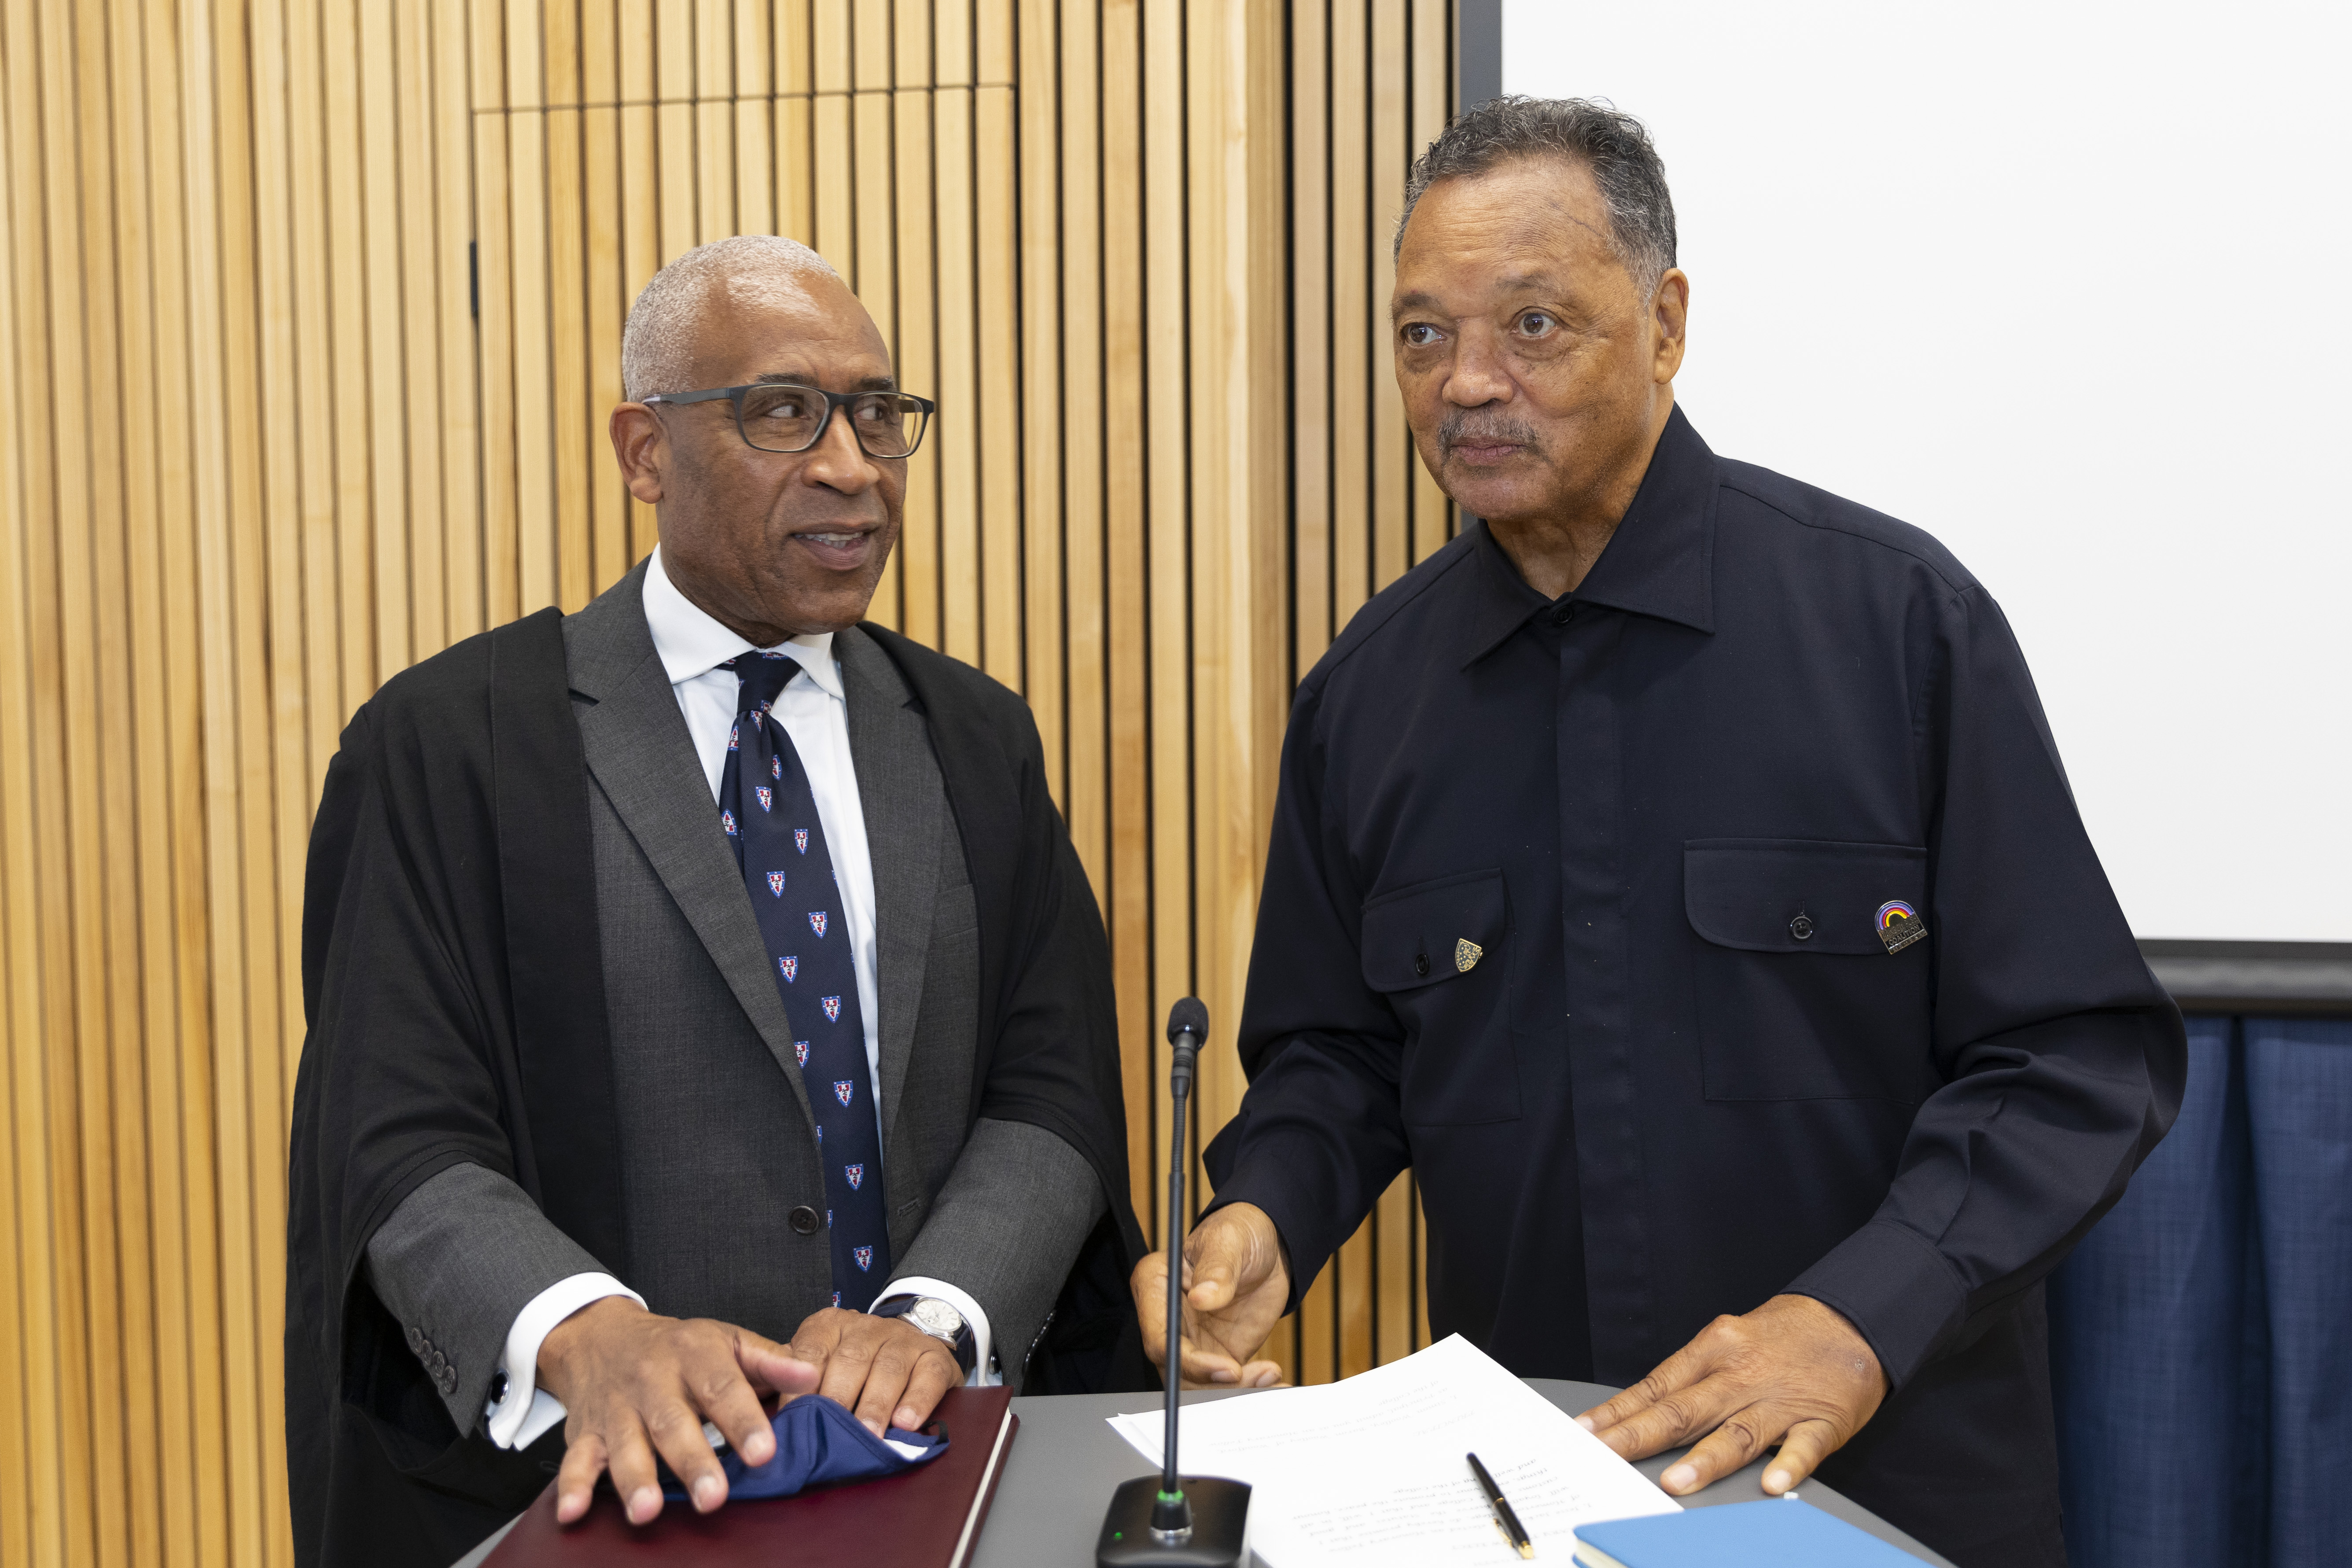 US civil rights activist Reverend Jesse Jackson has been made an honorary fellow of Cambridge's Homerton College. He is pictured with the college's principal Lord Woolley. (David Johnson/ PA)